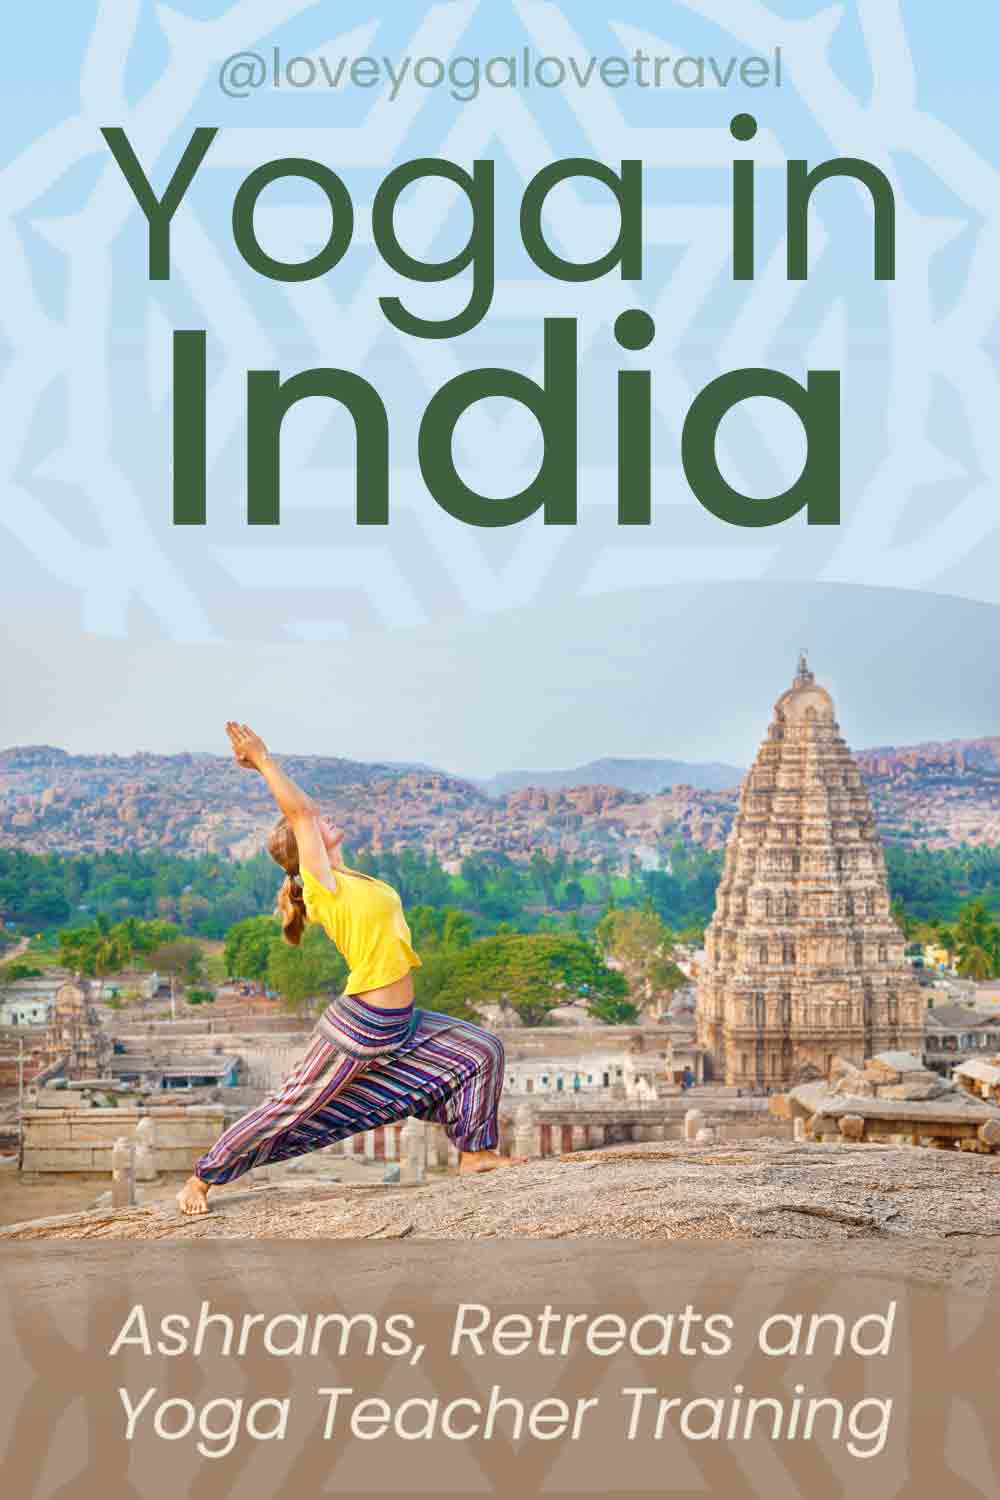 Pin Me! "The Complete Guide to Yoga in India"